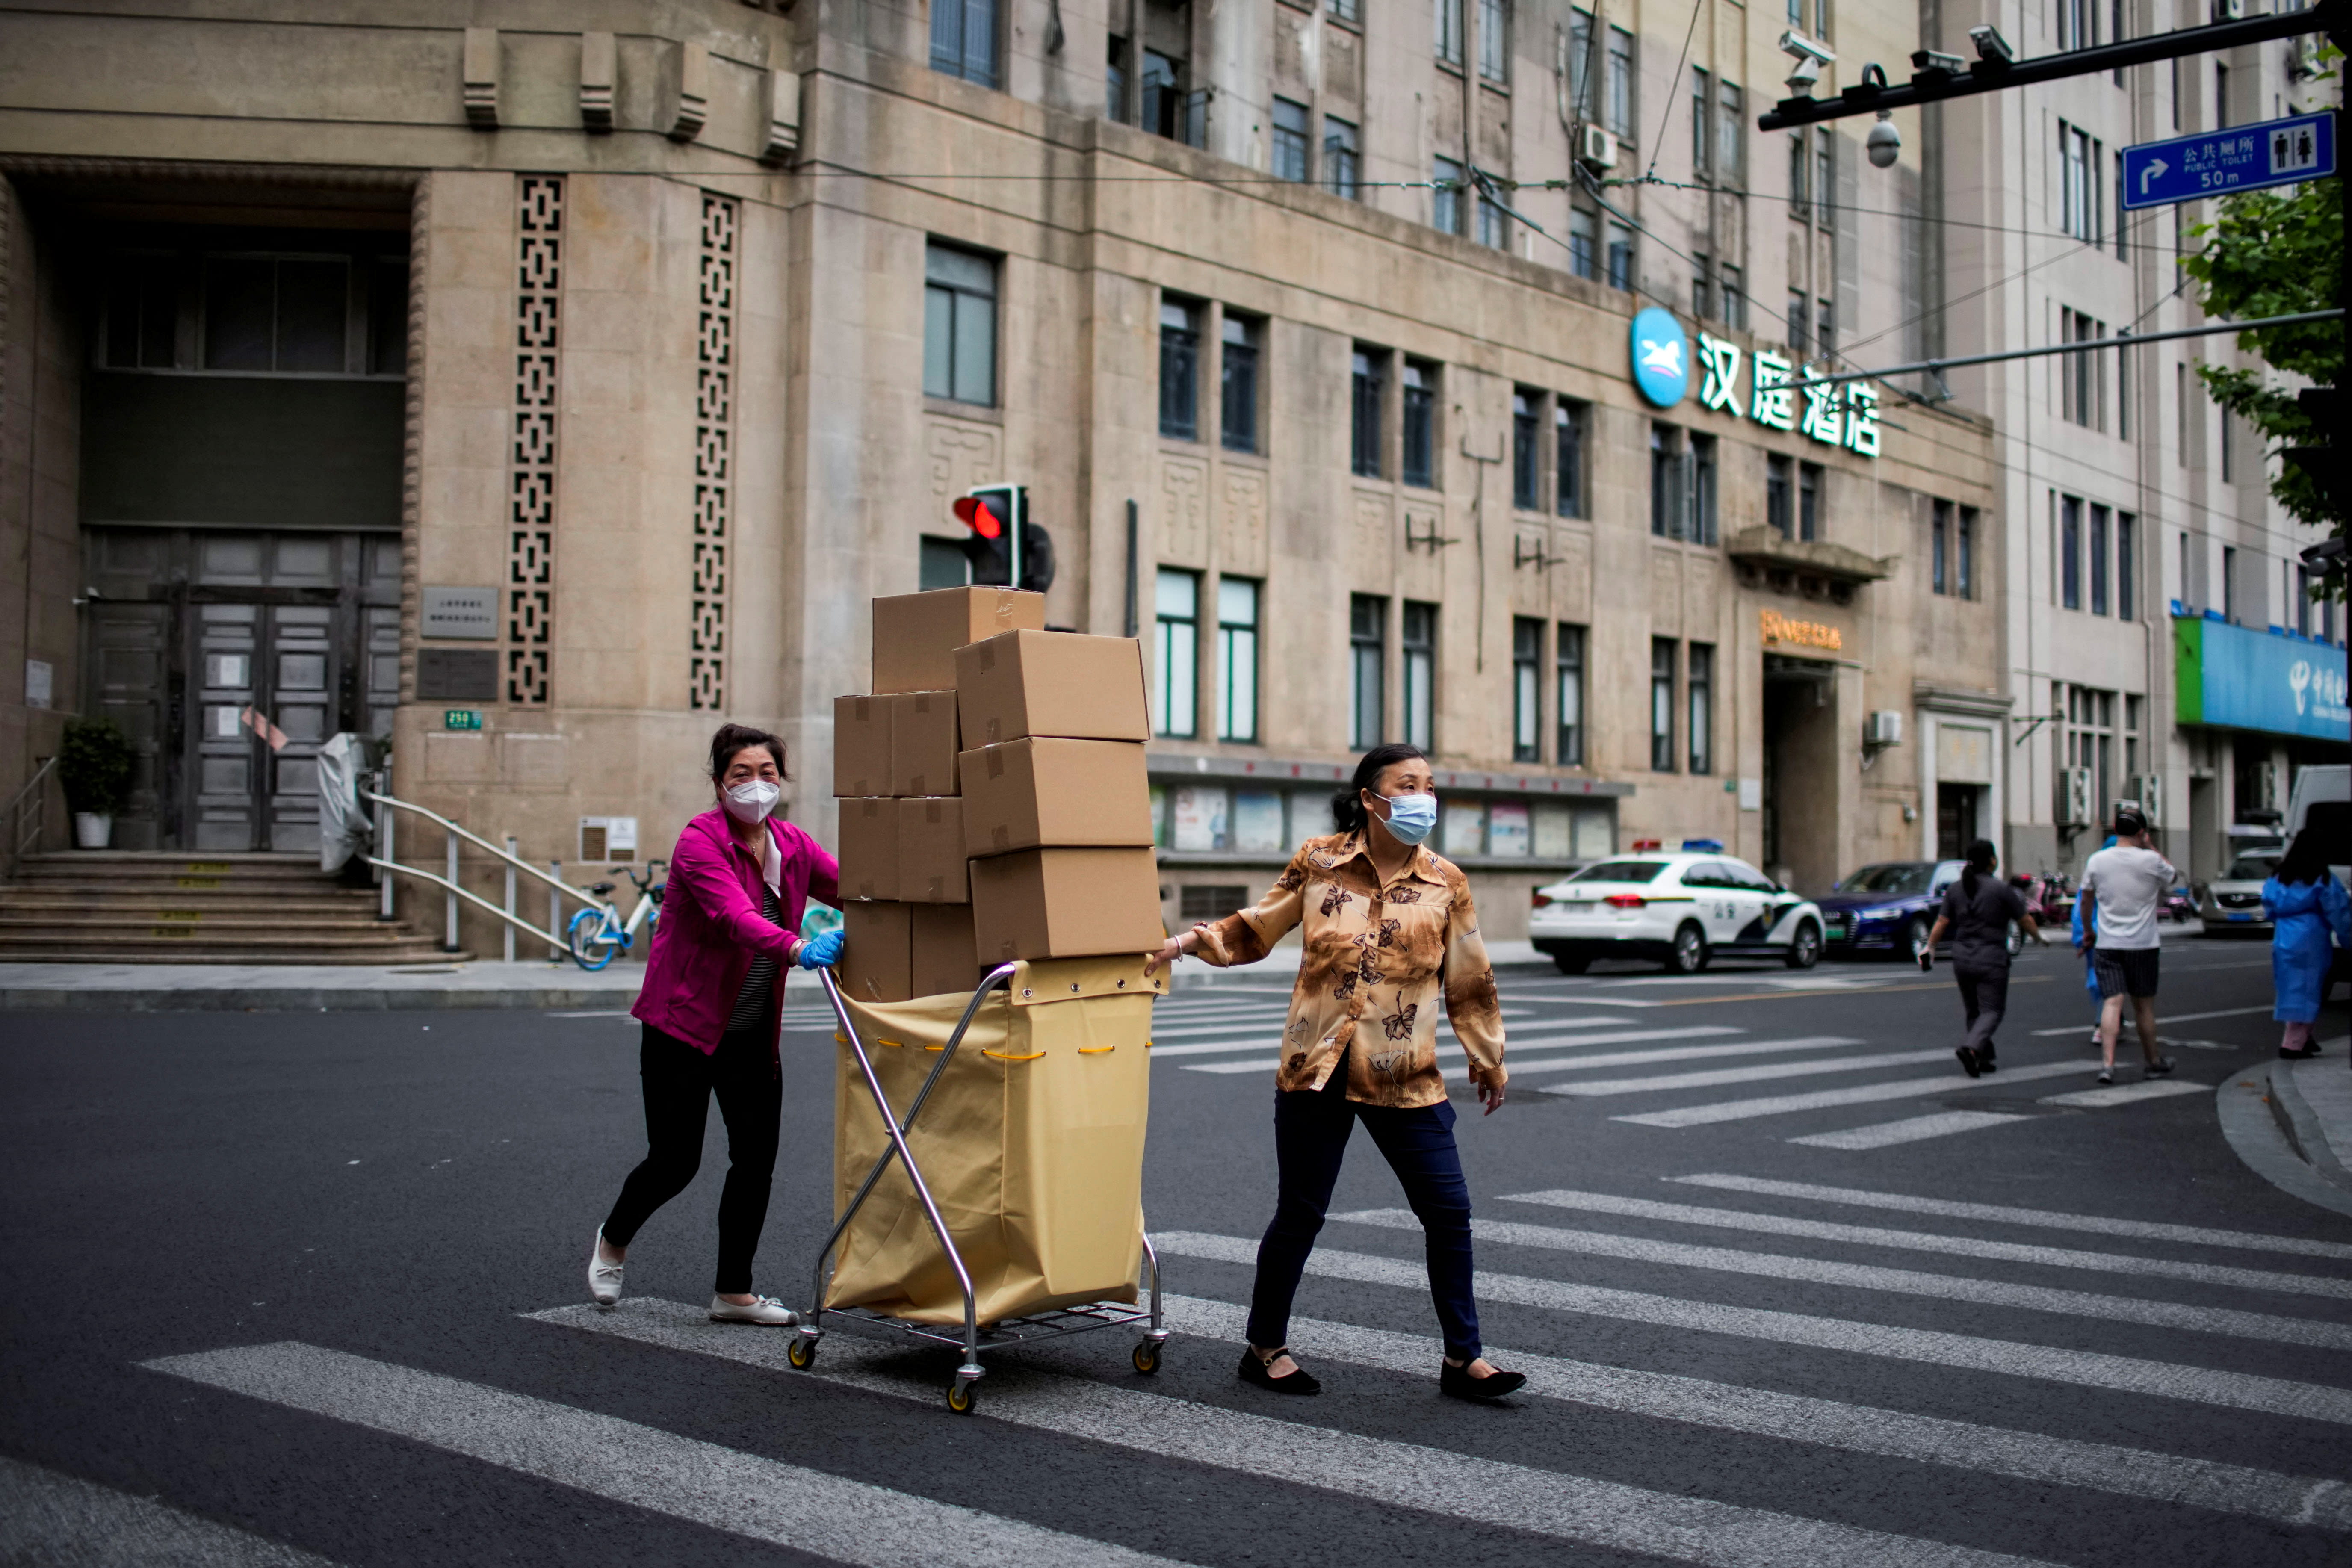 Women carry boxes of food on a street during lockdown, amid the Covid-19 outbreak, in Shanghai, China on May 18, 2022. 